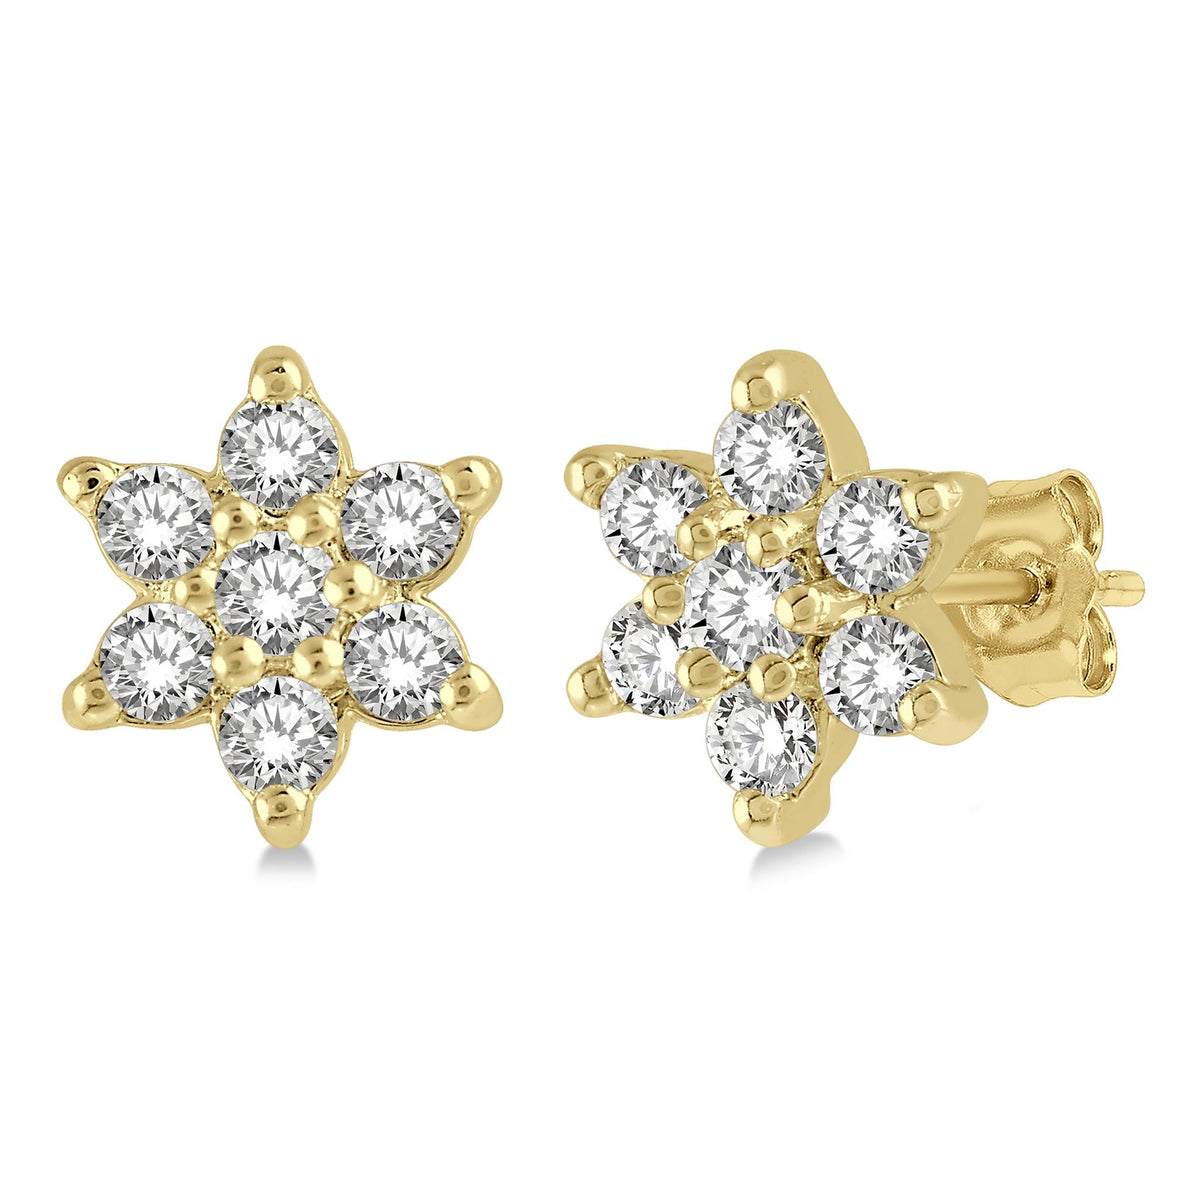 Lasker Petites-10Kt Yellow Gold Flower Stud Earrings with 0.15cttw Natural Diamonds